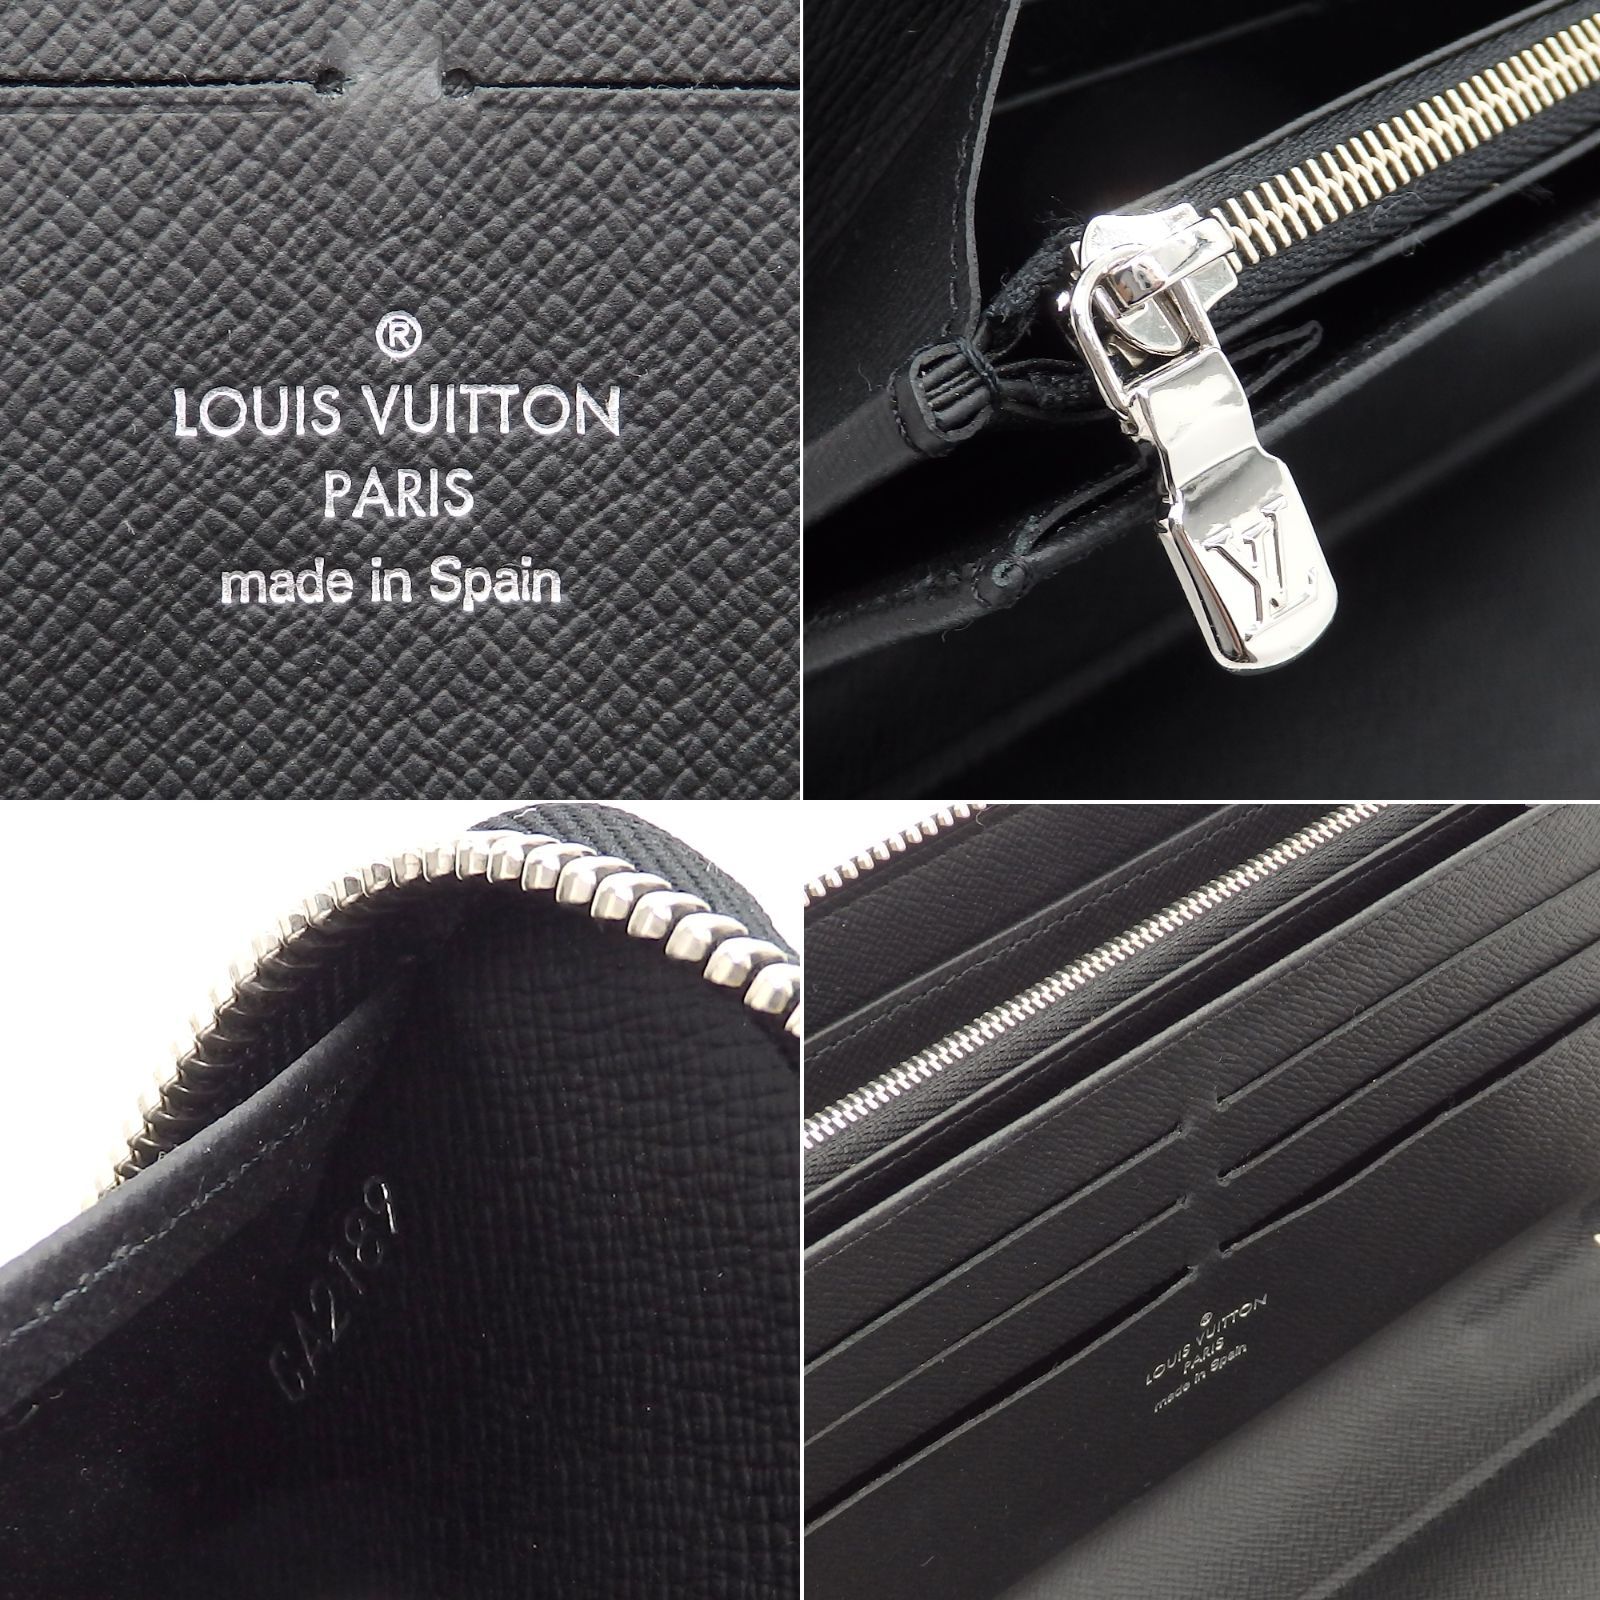 LOUIS VUITTON】ルイ・ヴィトン ダミエグラフィット ジッピー ...